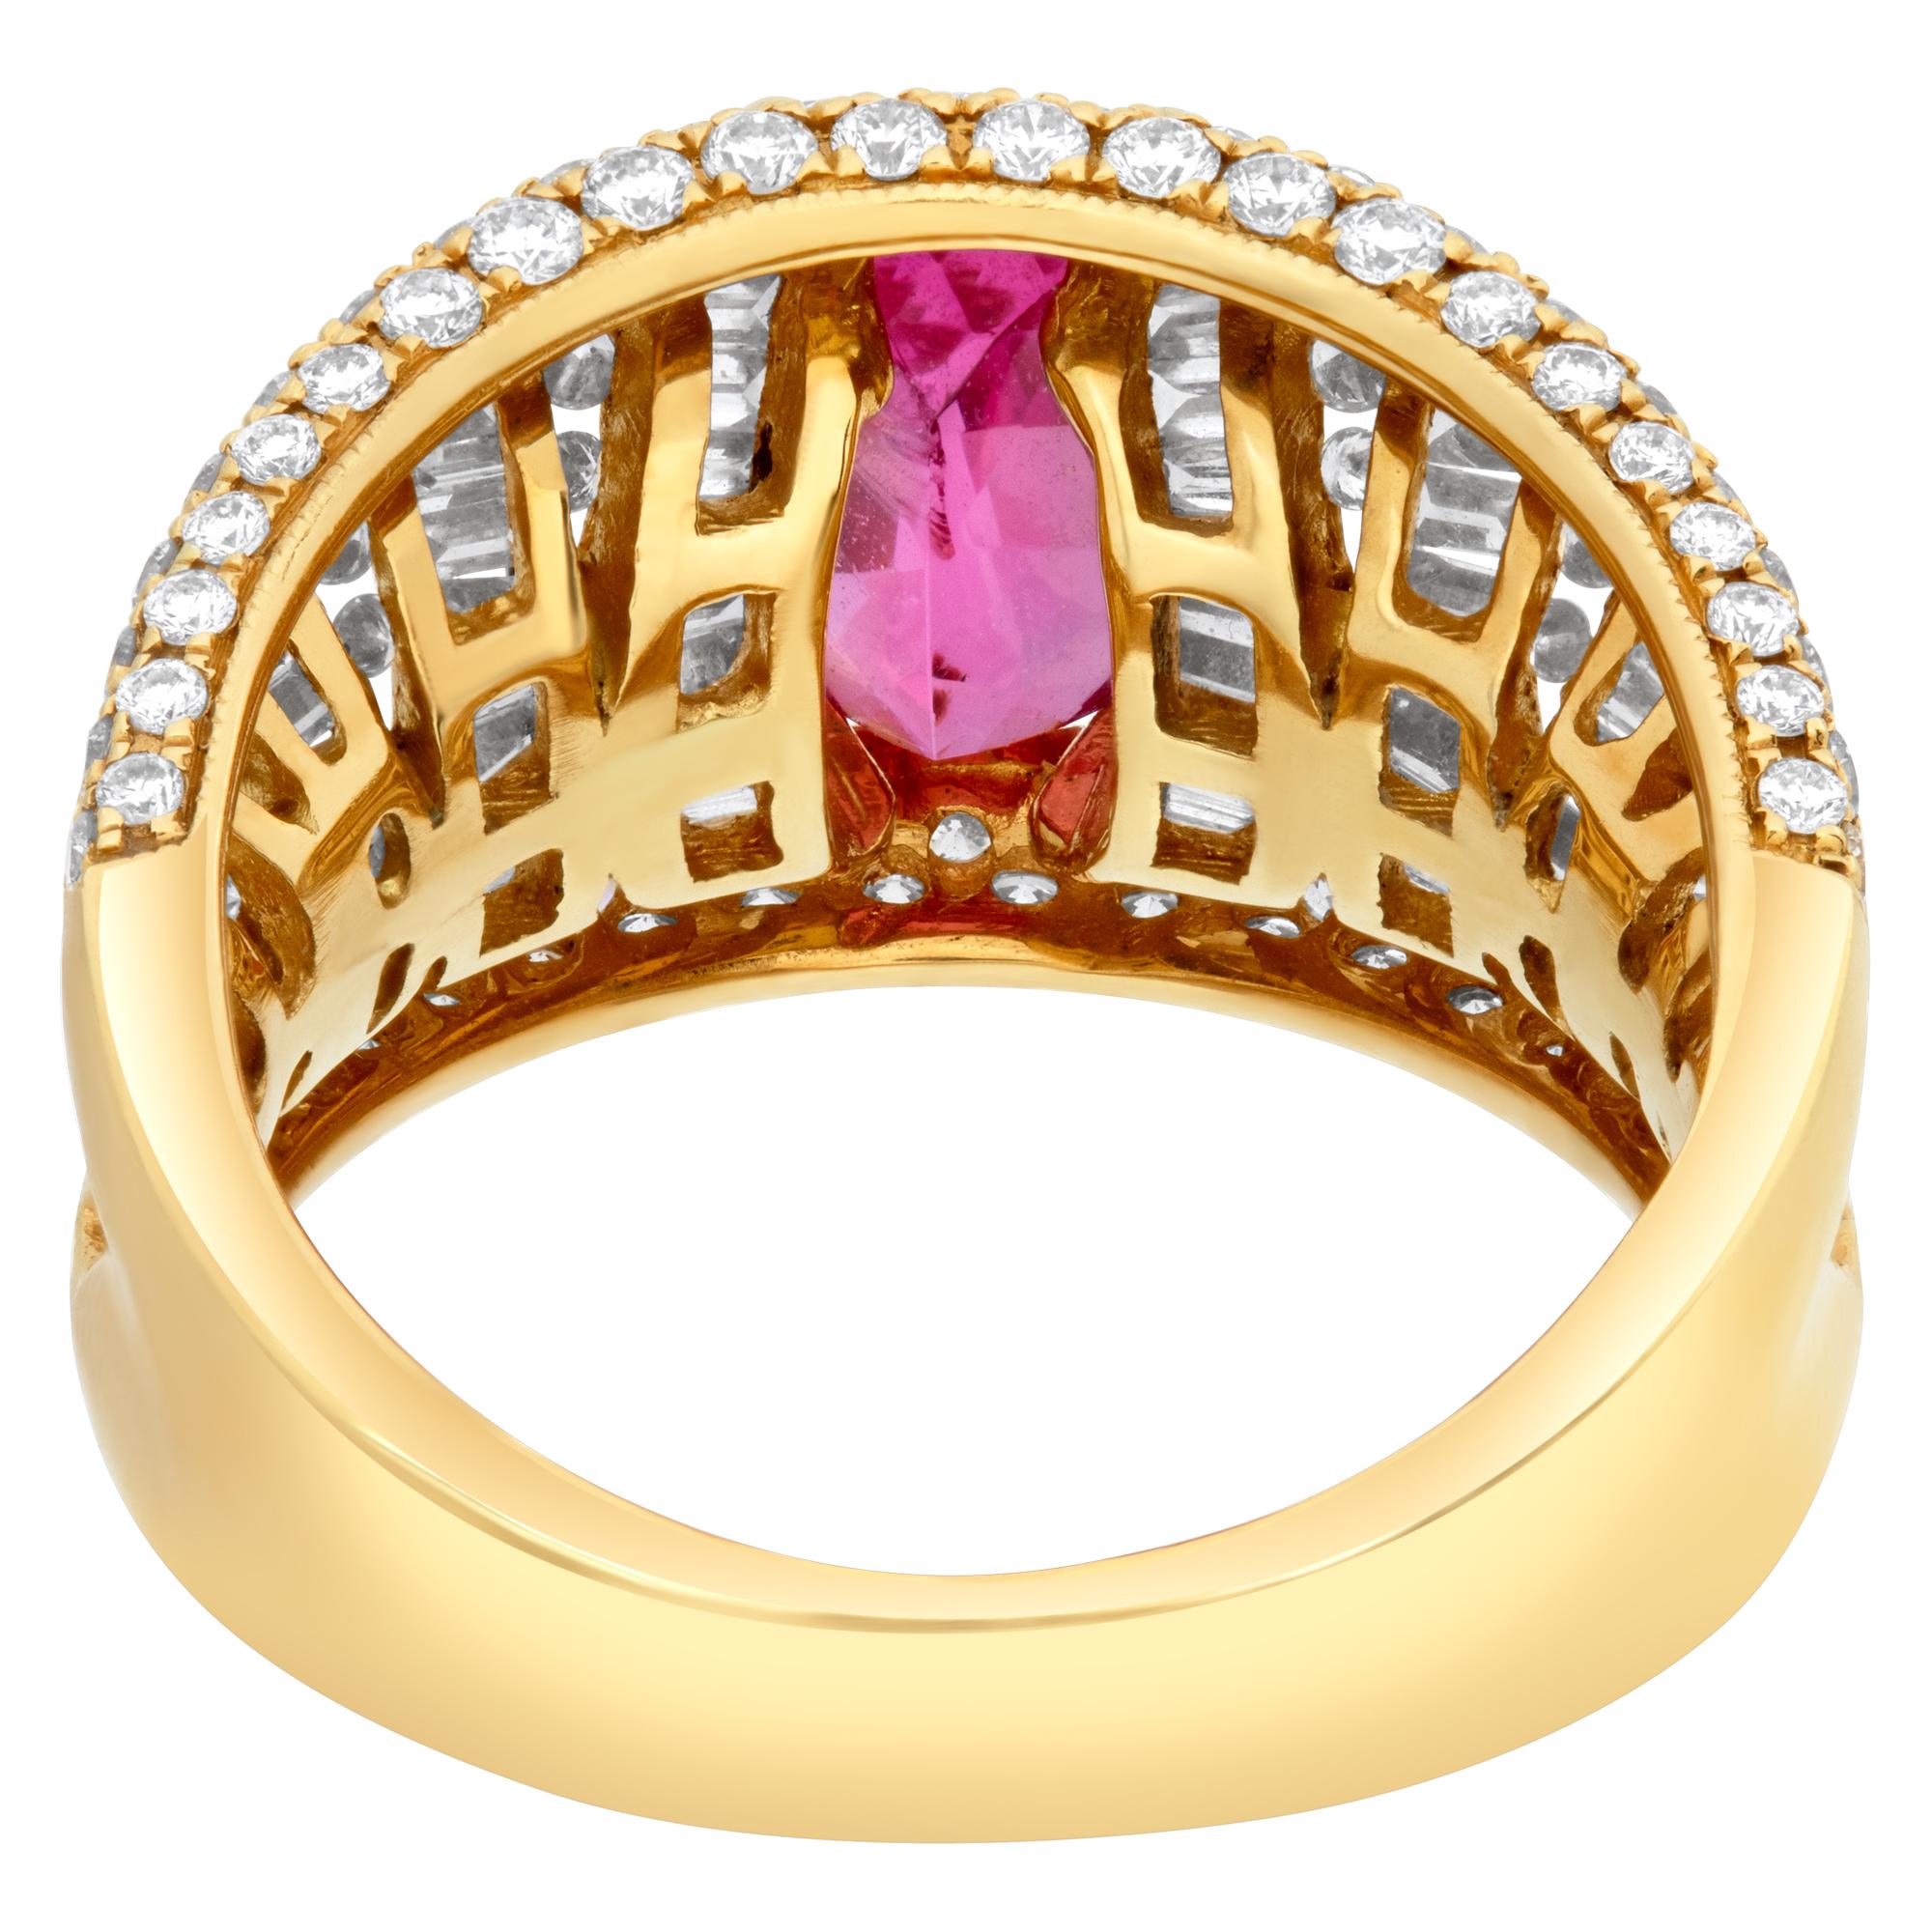 Women's 18k yellow gold ring with Oval brilliant cut pink spinel (2.73 carats) & diamond For Sale